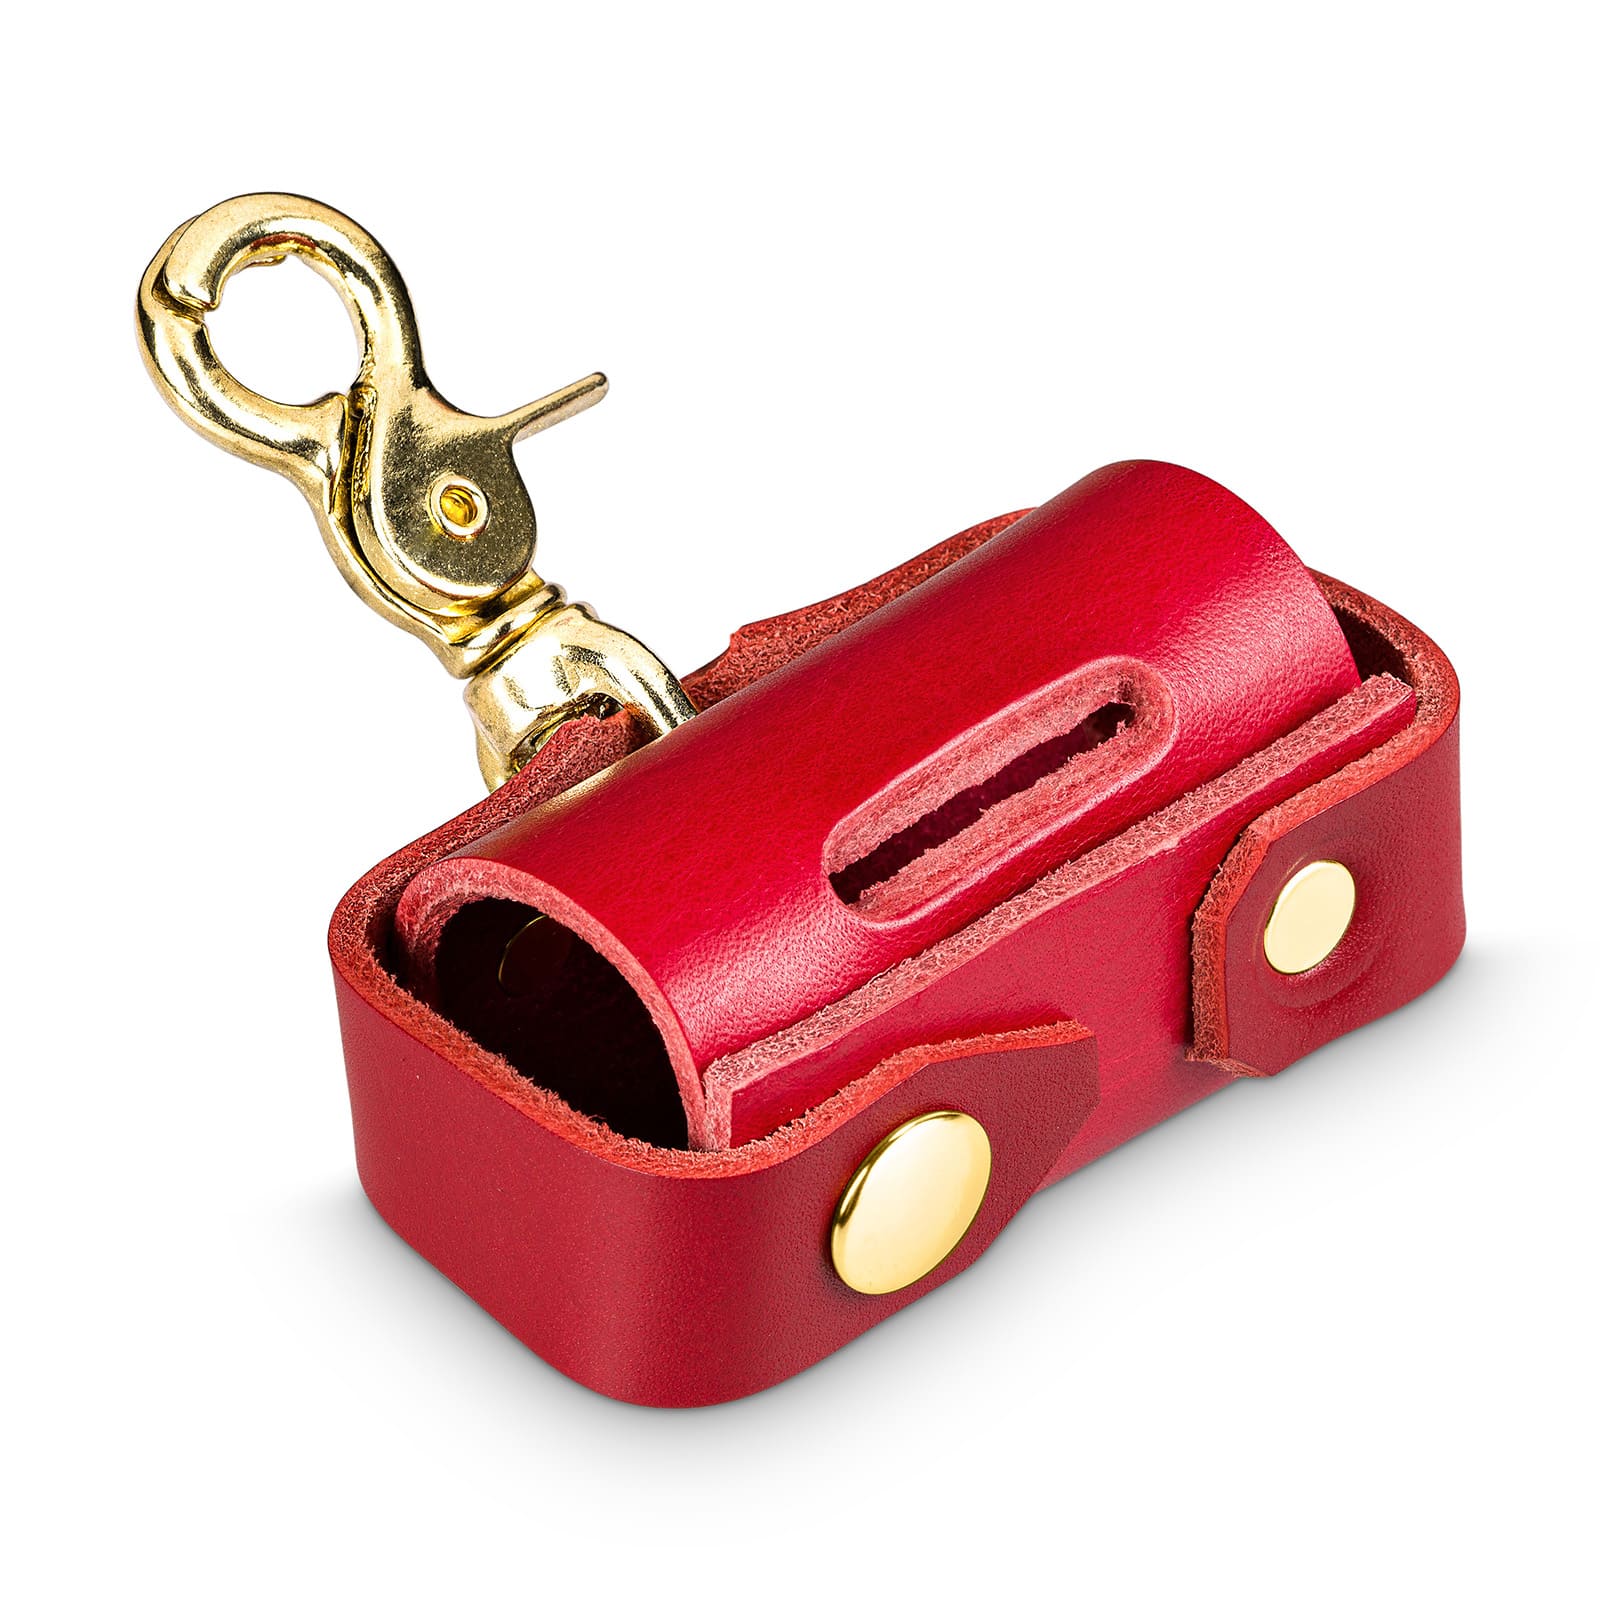 Red leather, brass carabiner